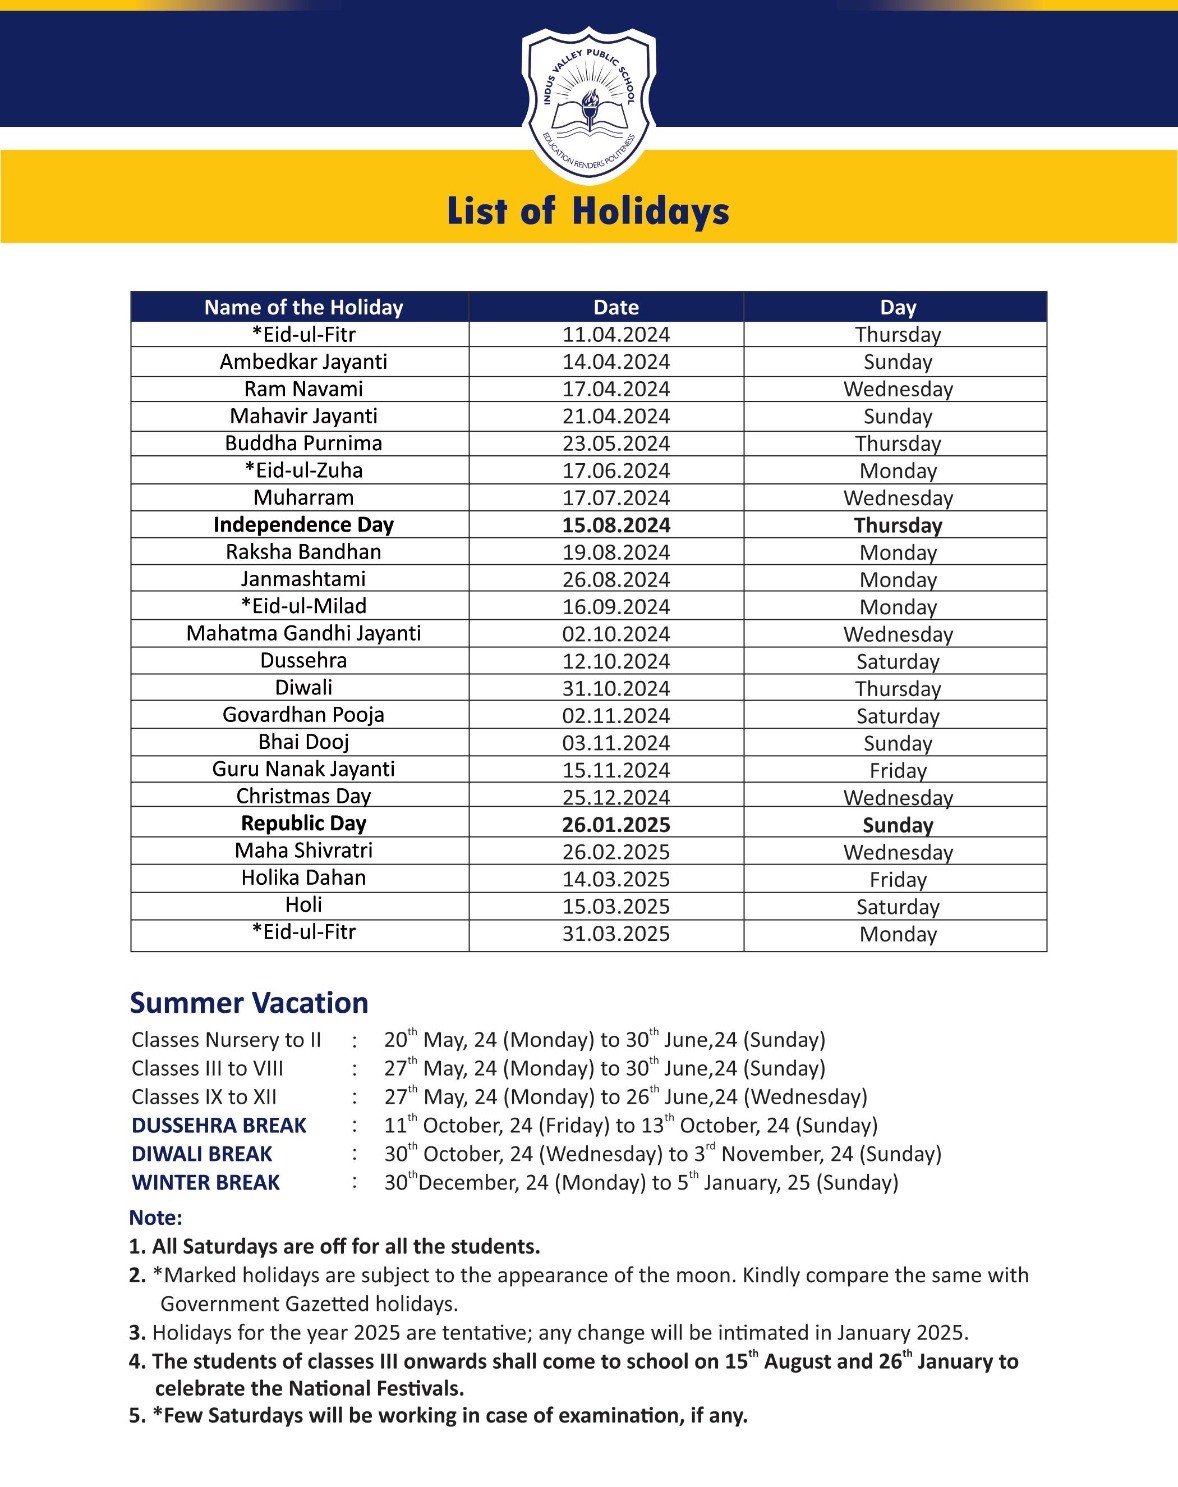 List of Holiday